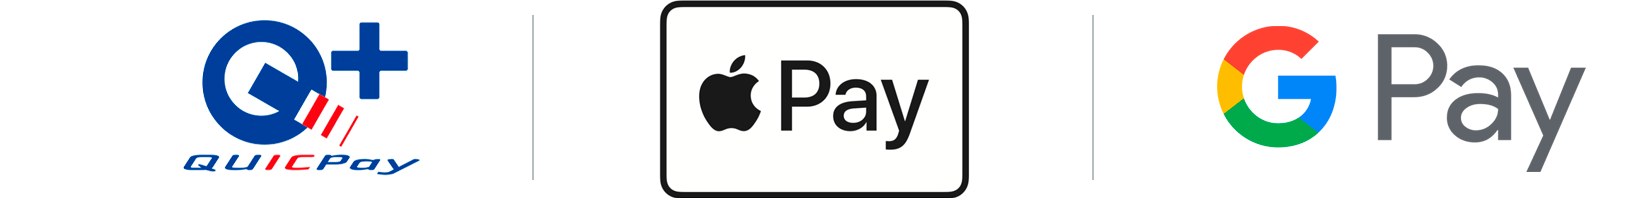 quicpay/Apple Pay/Google Pay